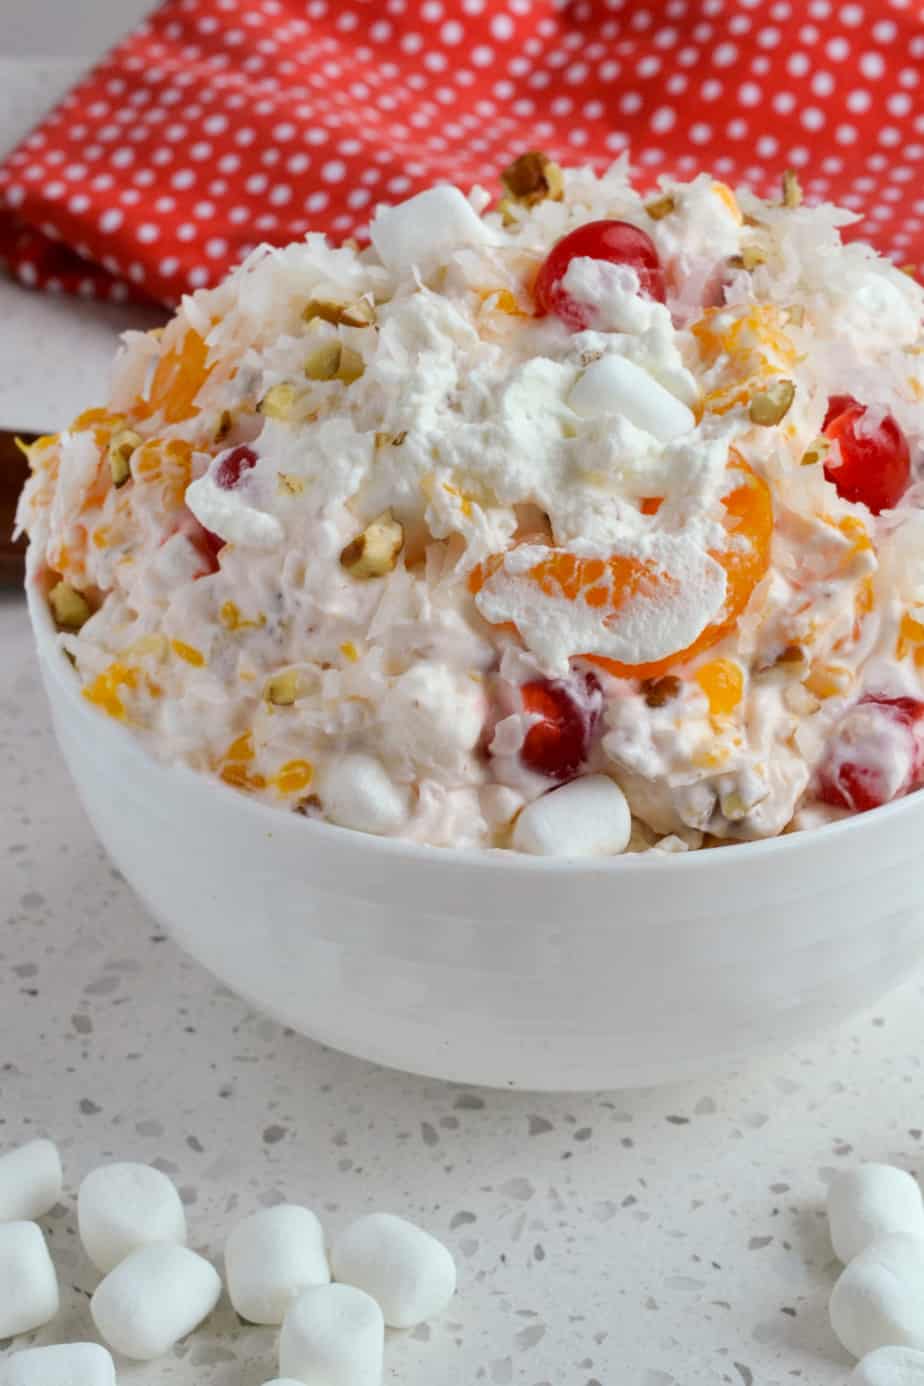 Fruit salad with nuts, marshmallows, and coconut.